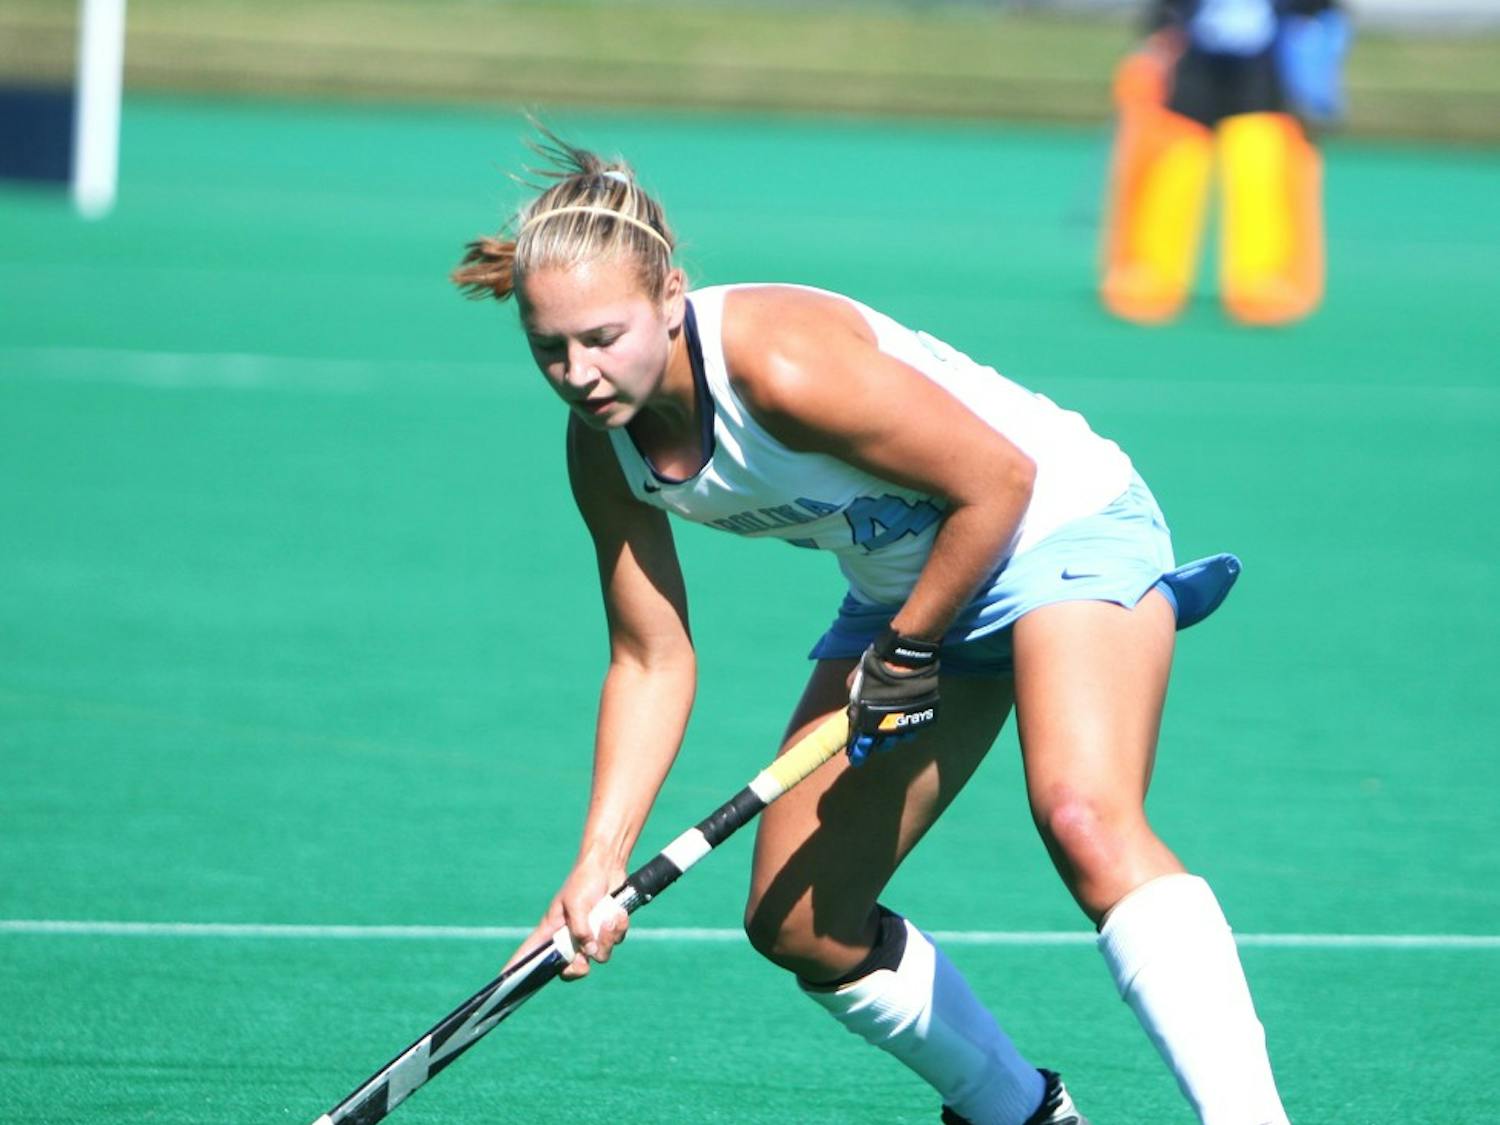 Sophomore Kelsey Kolojejchick has played in back-to-back national title games for North Carolina. She led the Tar Heels this year with 15 goals.